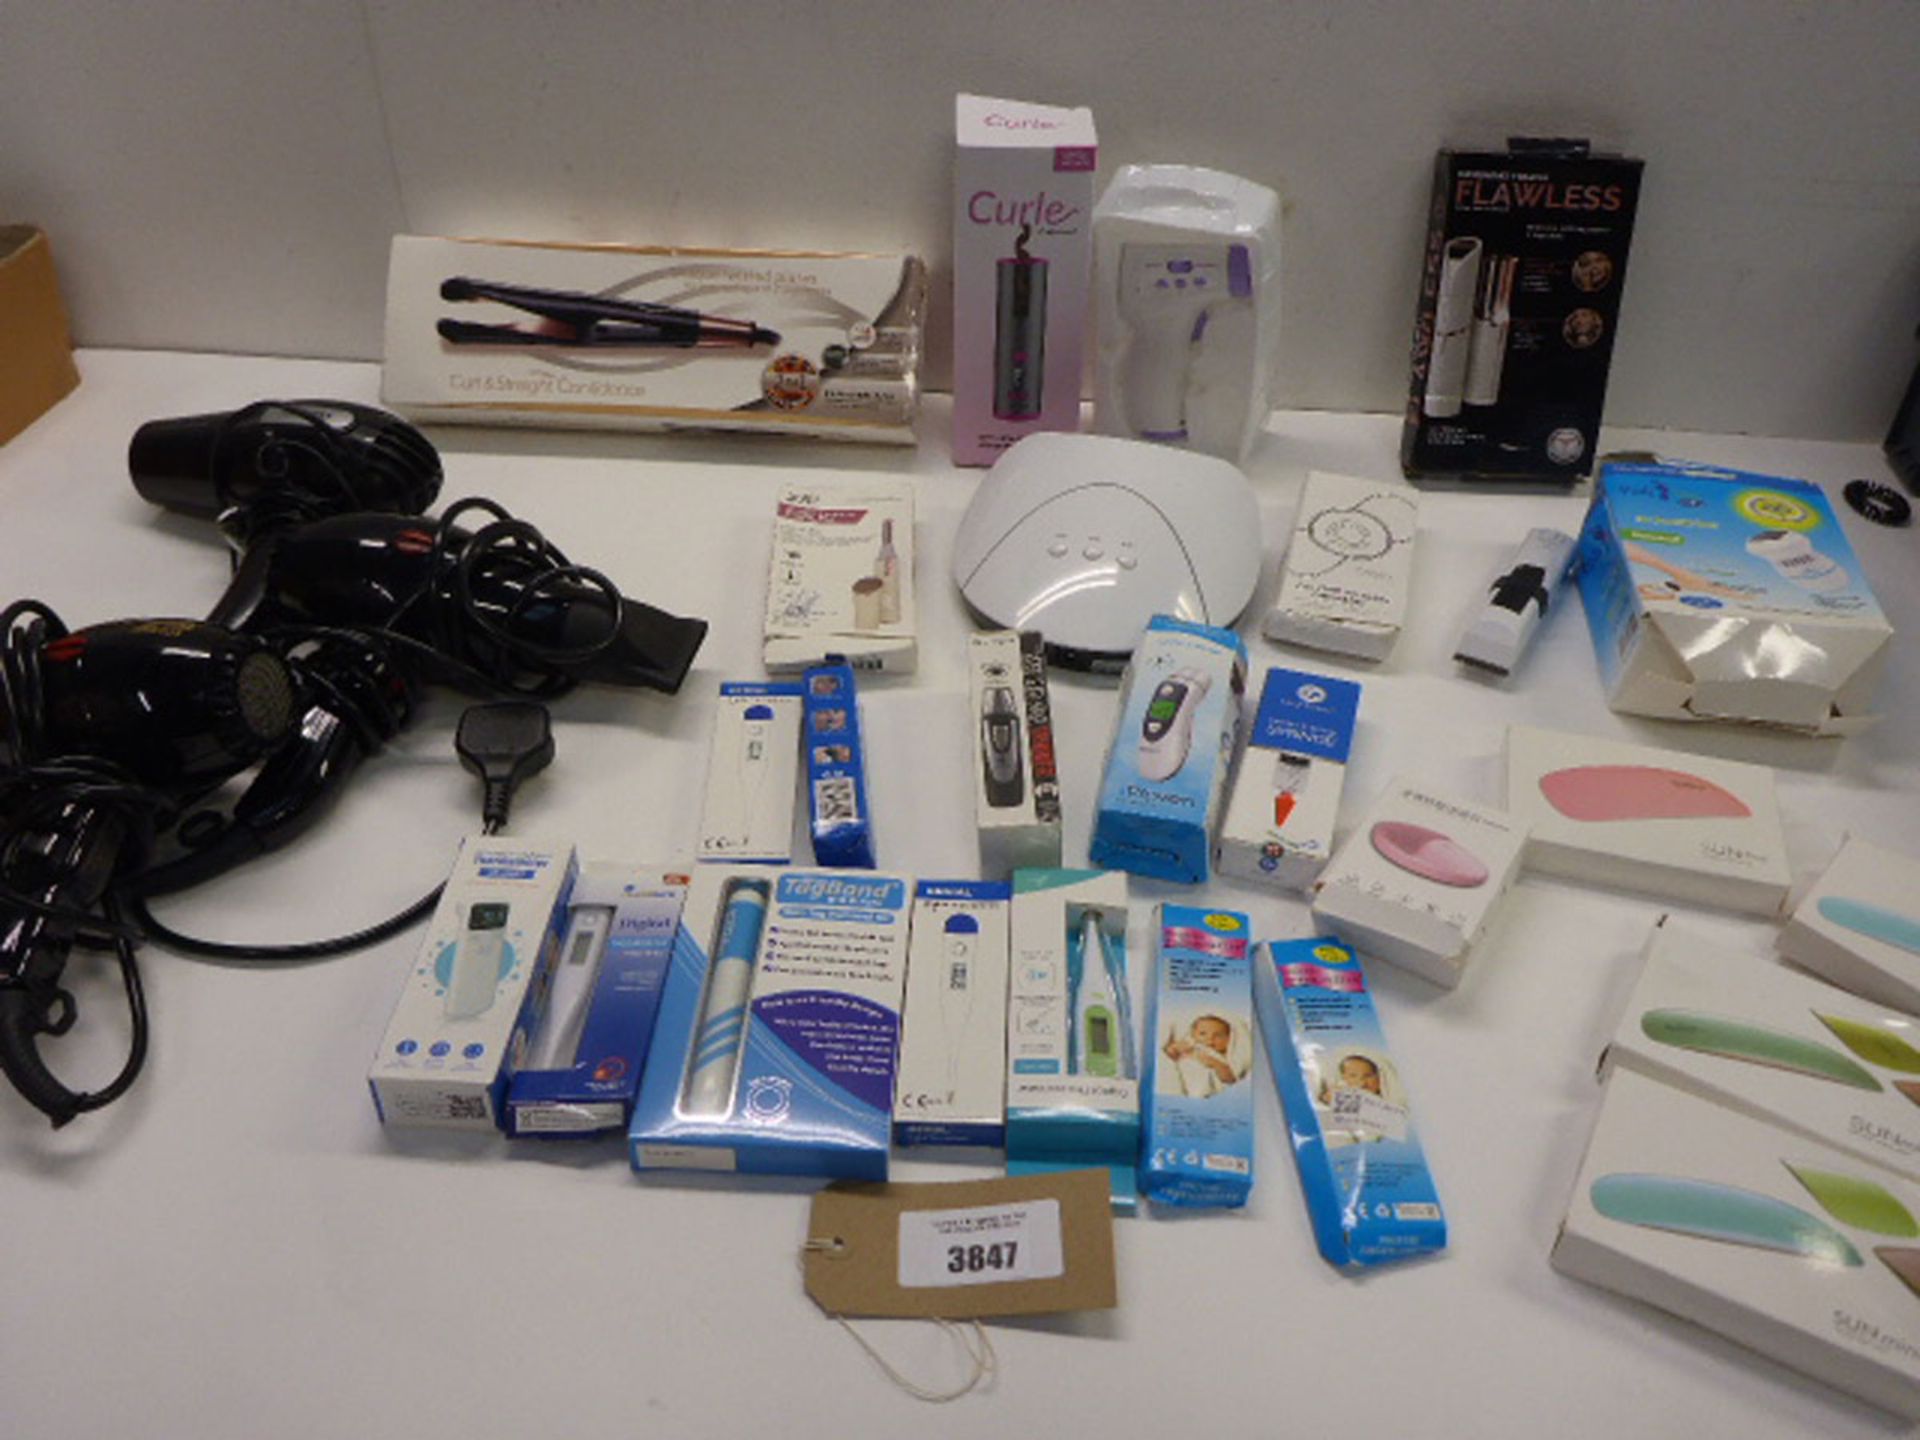 Hair stylers, nail lamps, digital thermometers, massager, 3 used hair dryers etc